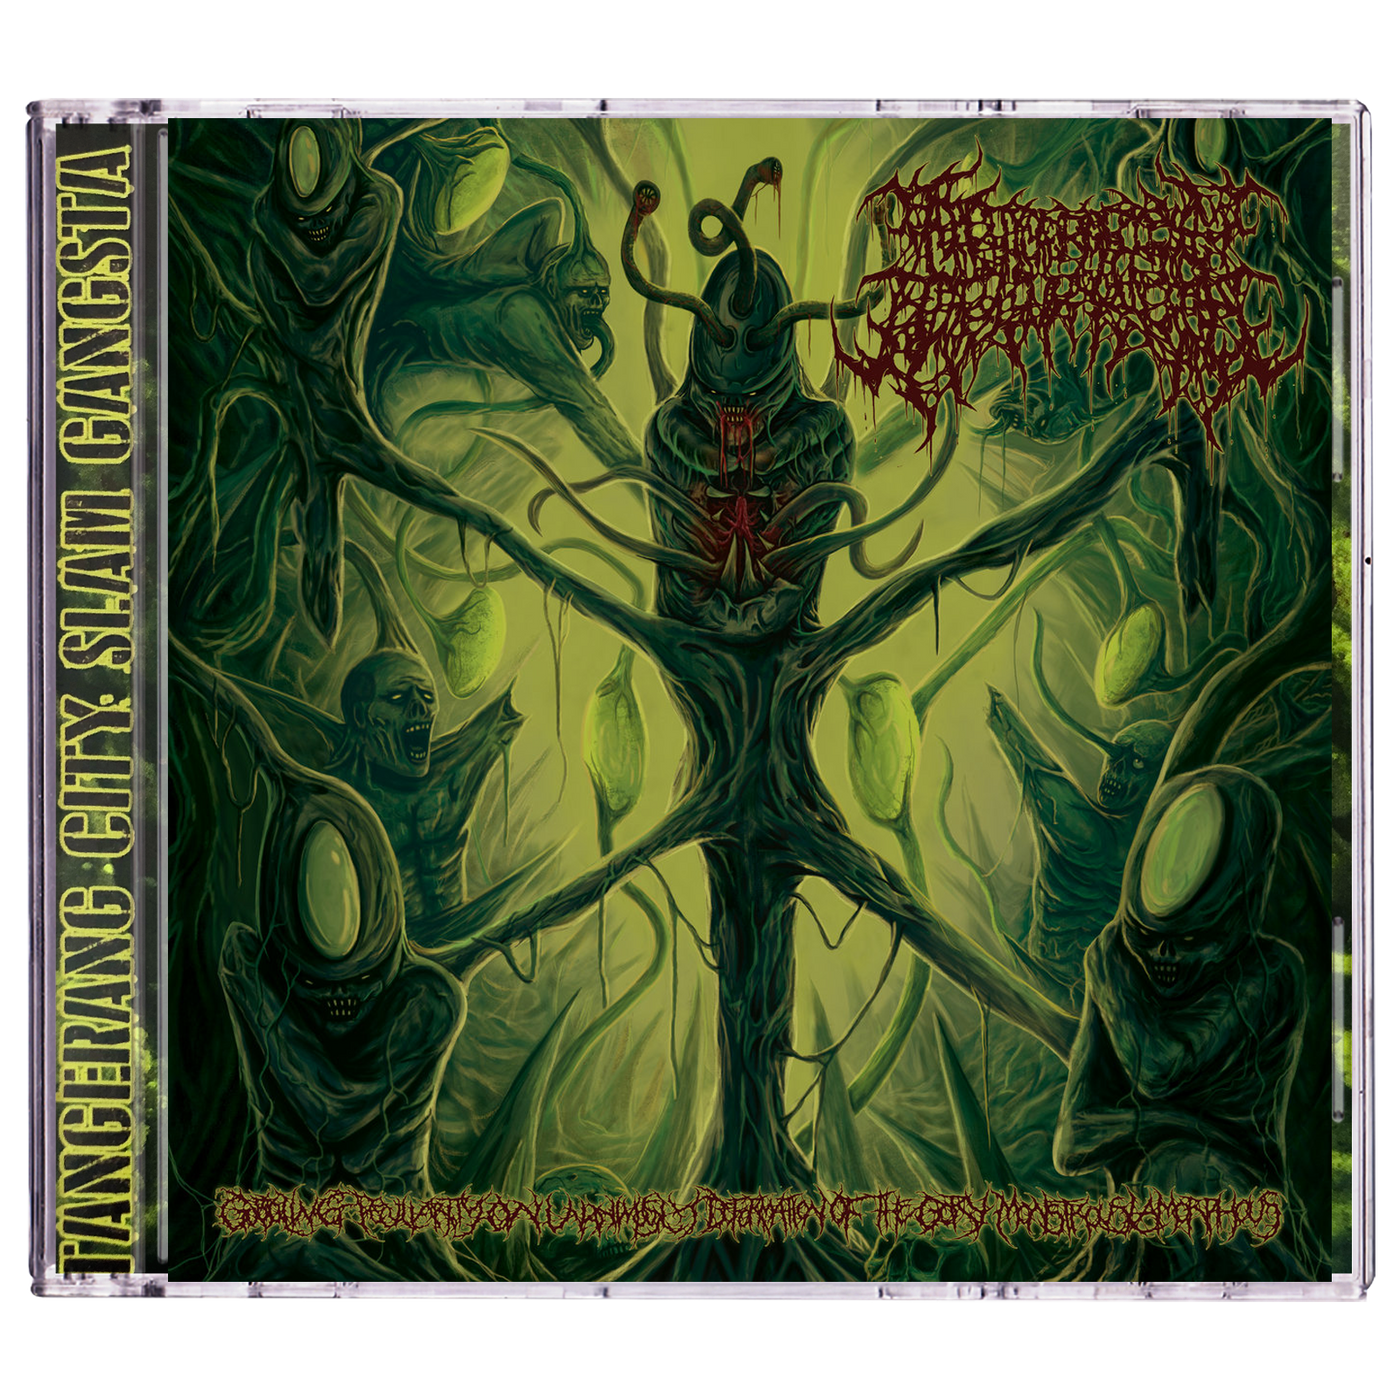 Abominable Devourment 'Gobbling Peculiarity On Unanimously Deformation Of The Gory Monstrouslamorphous' CD